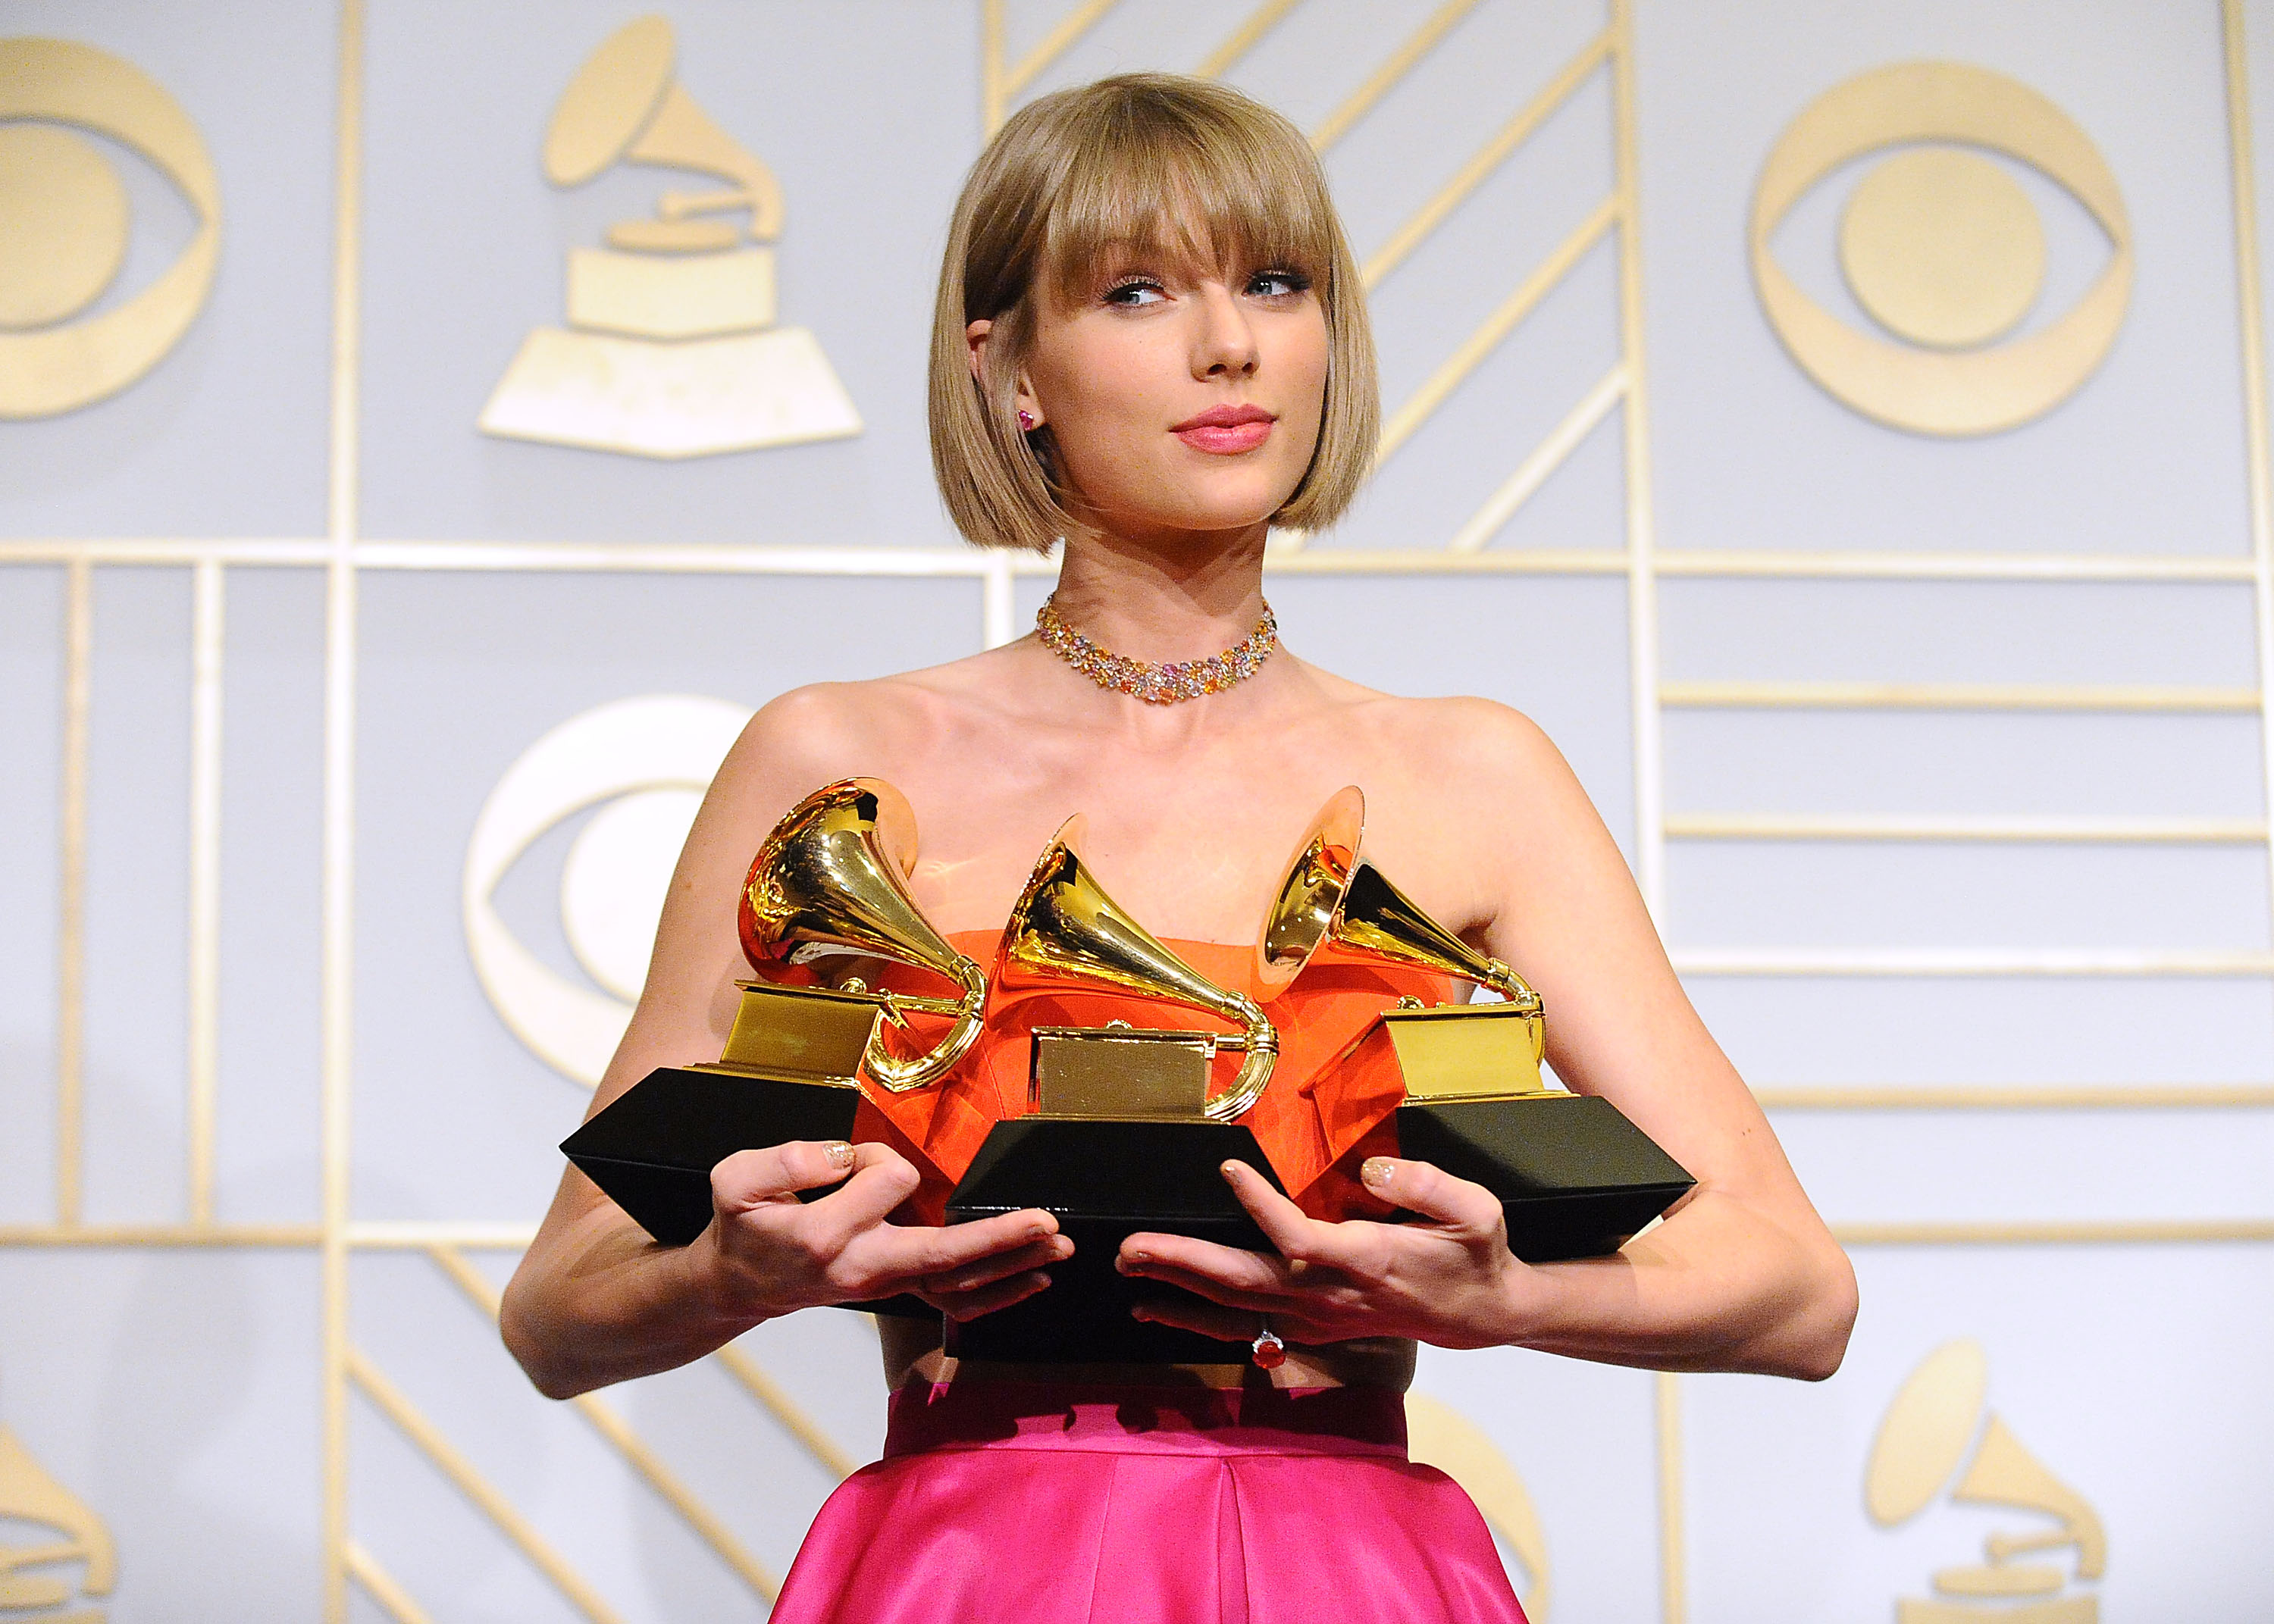 Taylor Swift at the 2016 Grammys.